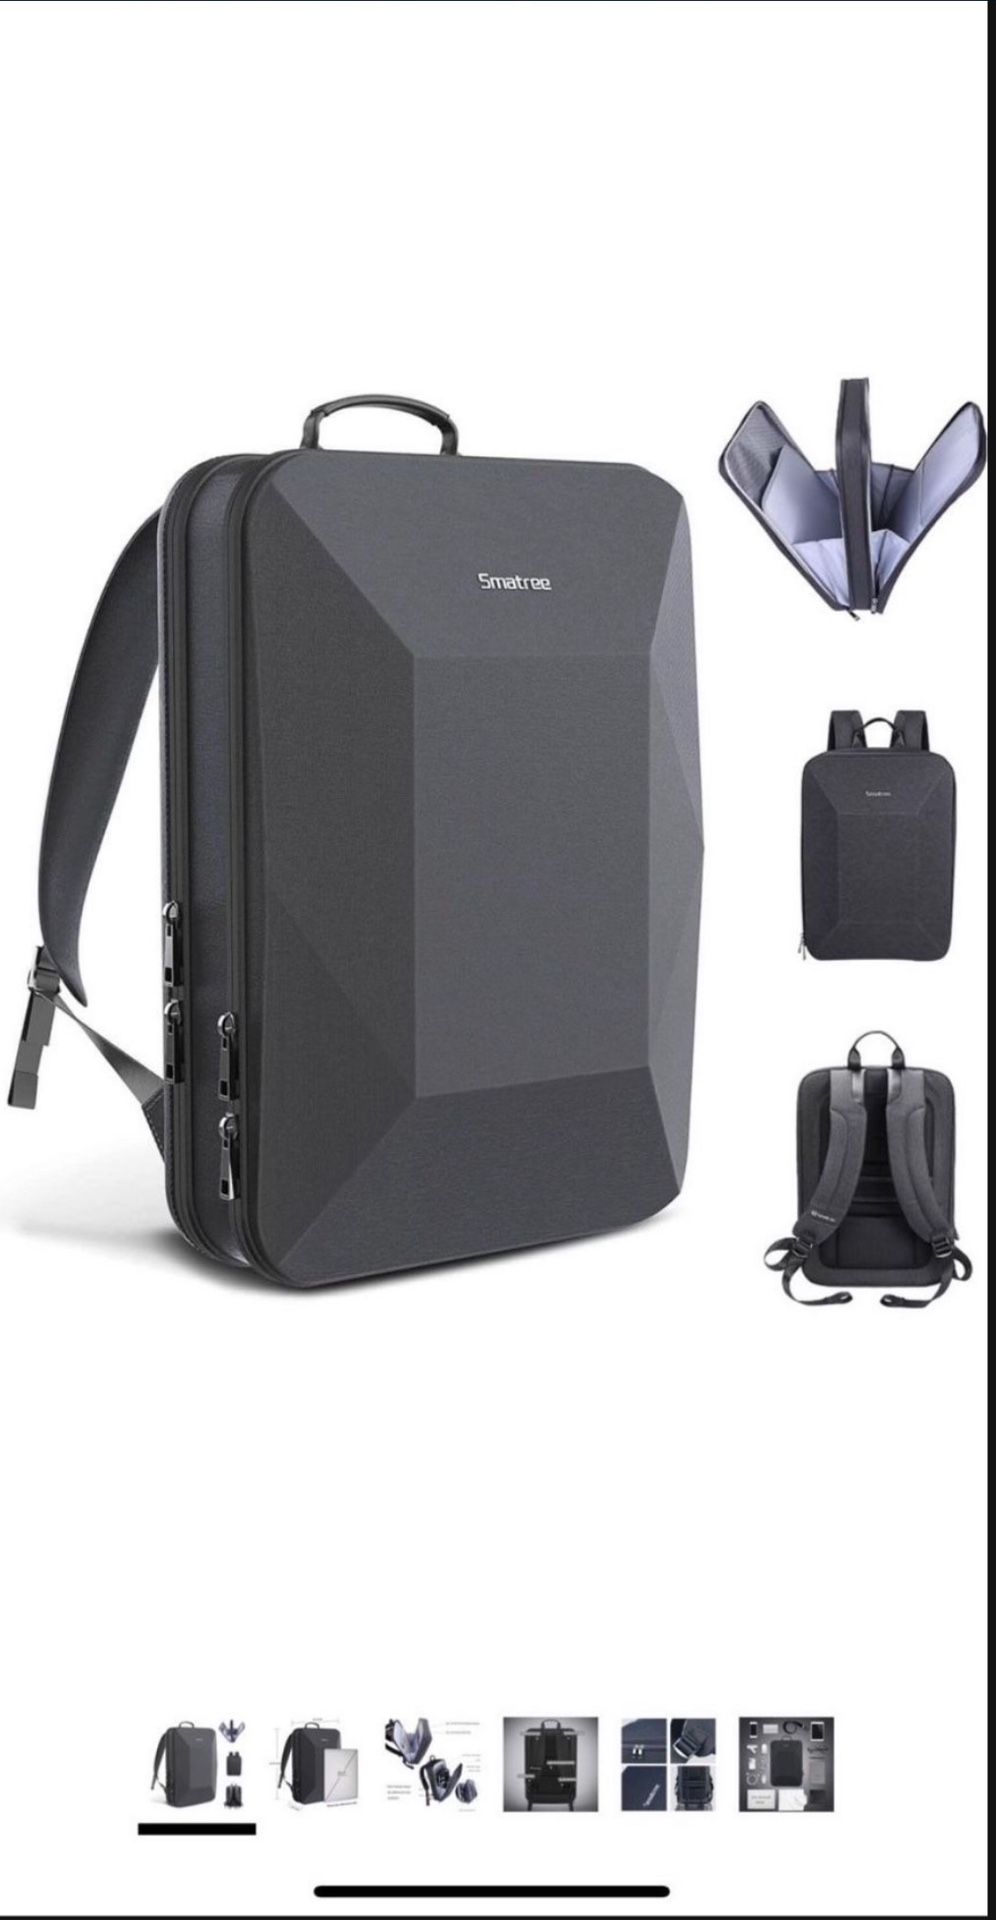 Smatree 15.6-16 inch Laptop Backpack